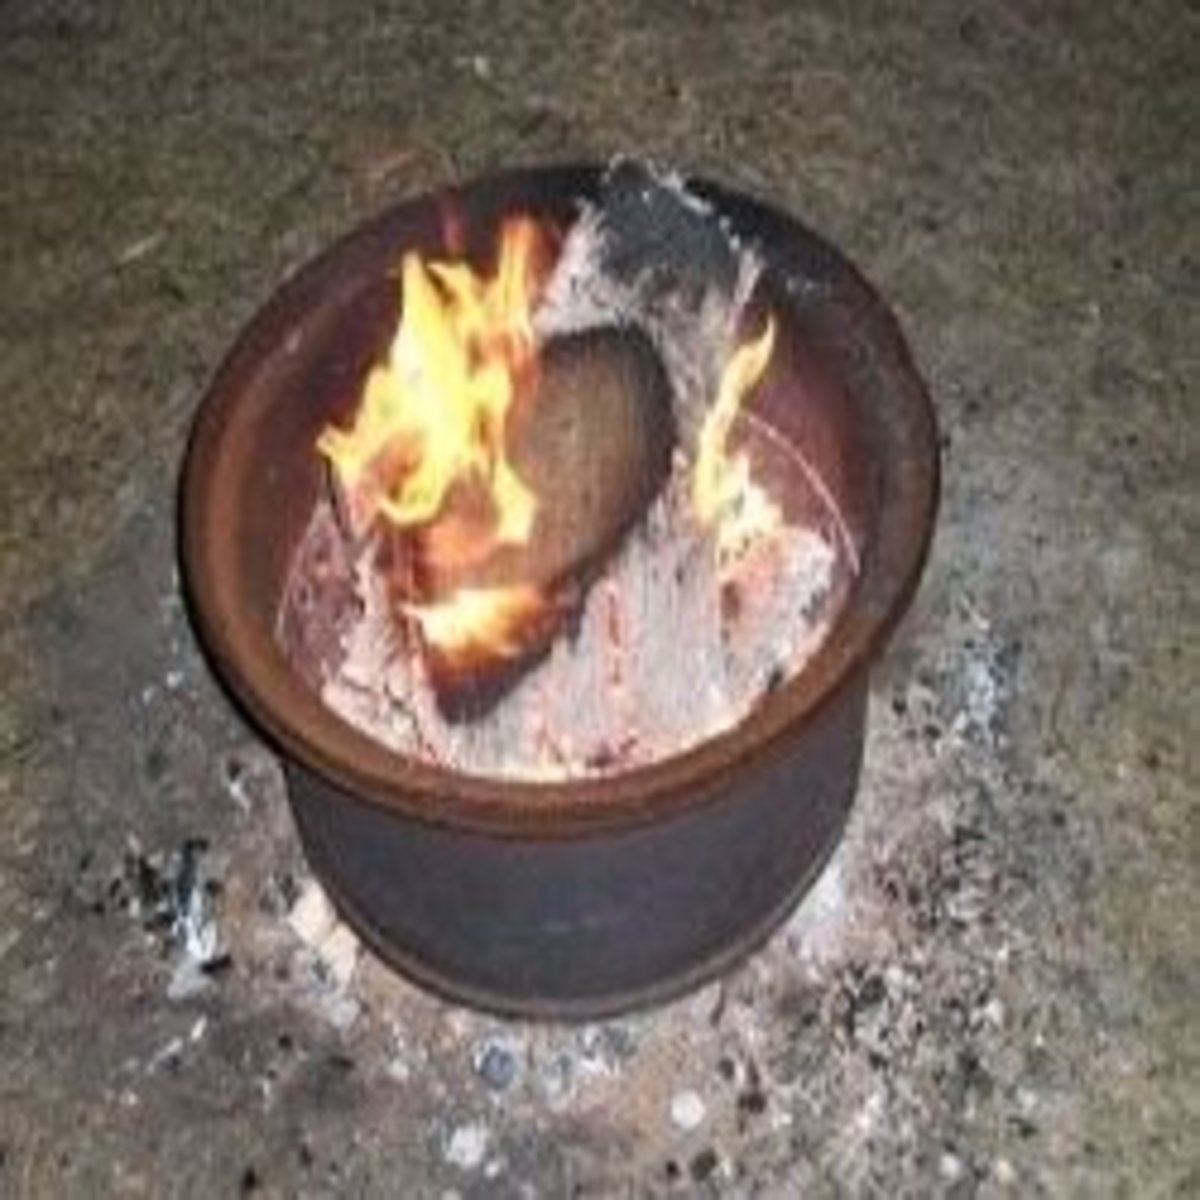 Change the Color of Your Campfire